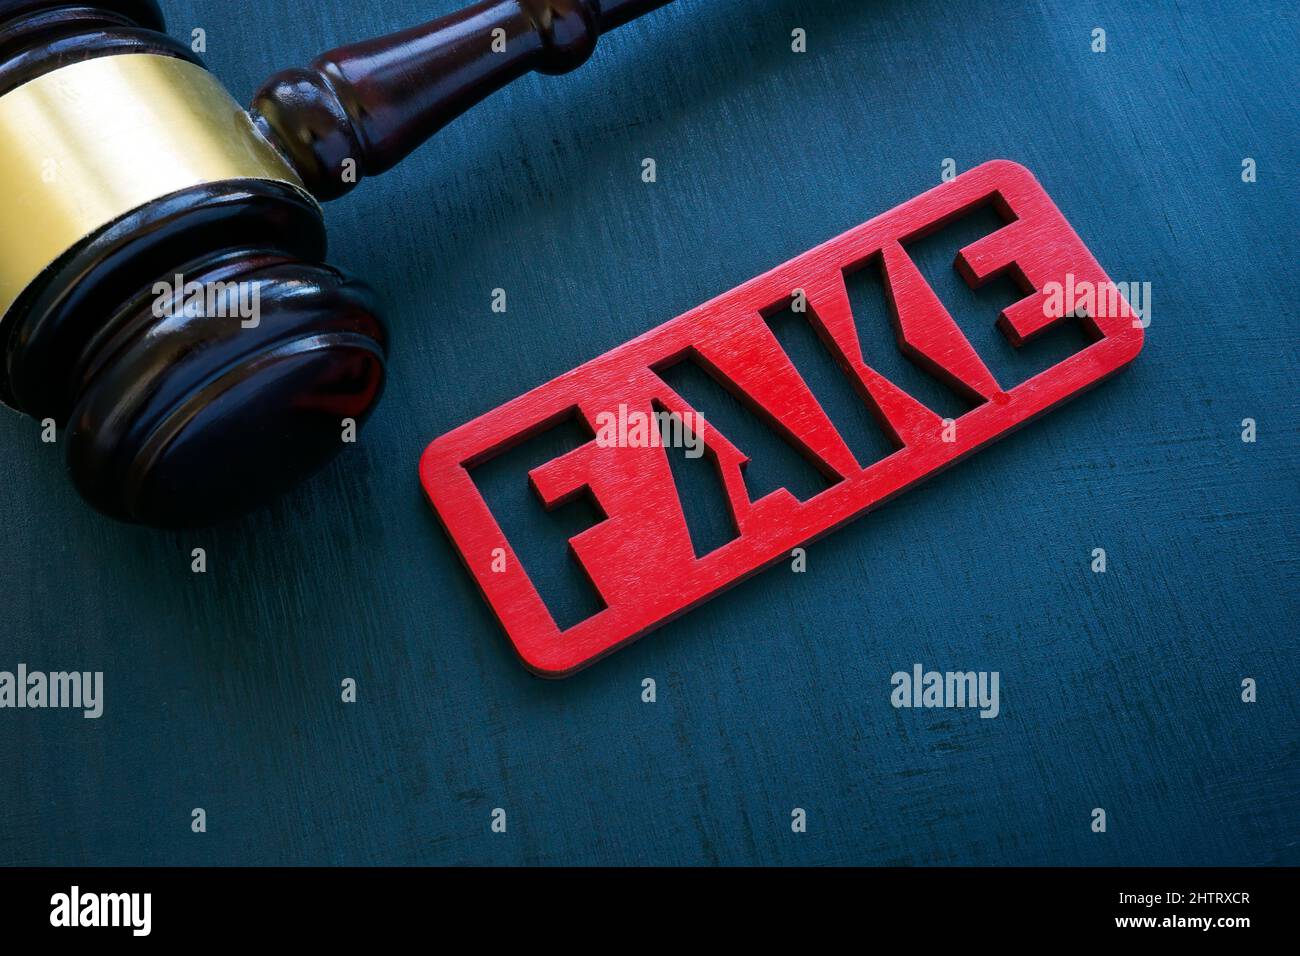 Fake news and punishment concept. Gavel and plate on the surface. Stock Photo